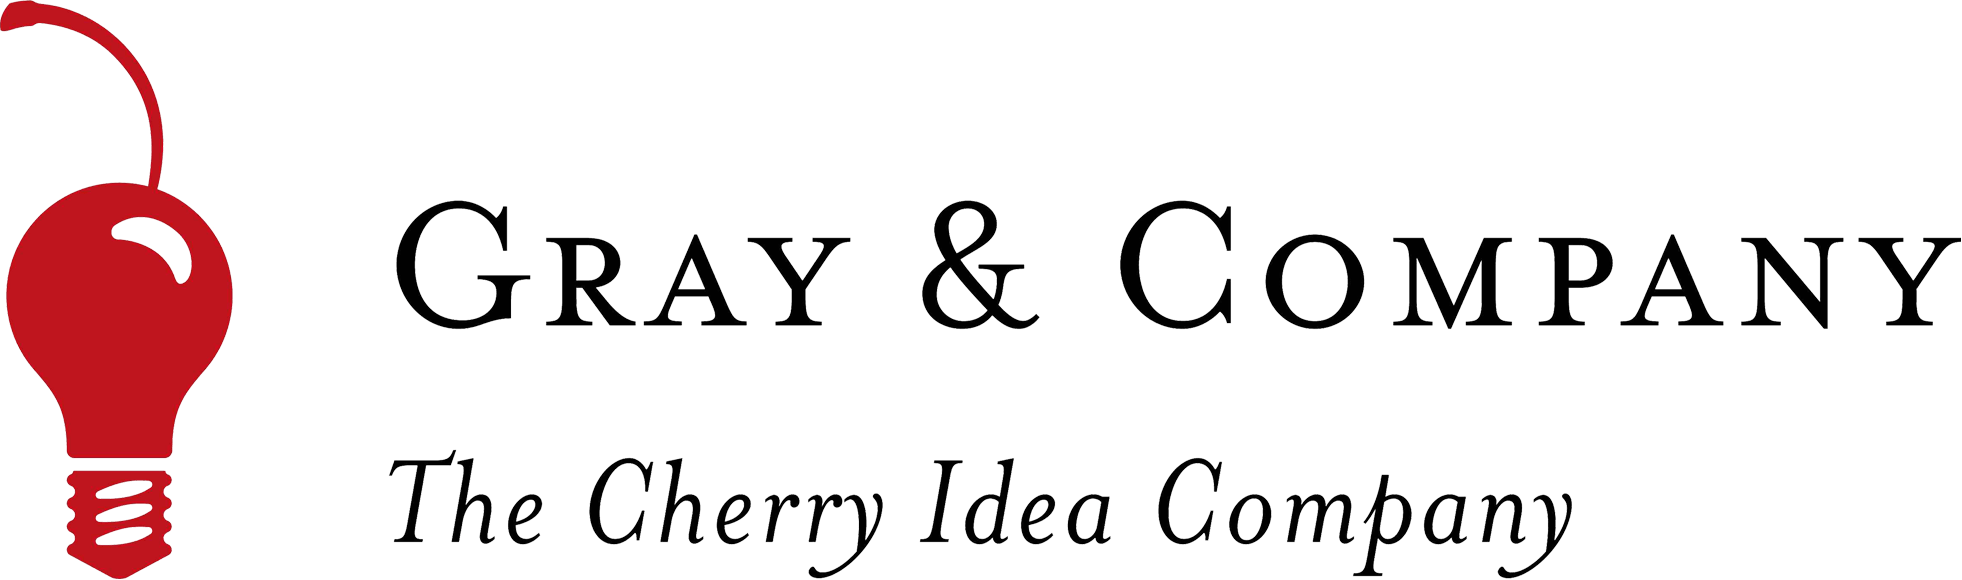 Gray Company Logo - Gray and Company, the largest maraschino cherry and glace fruit